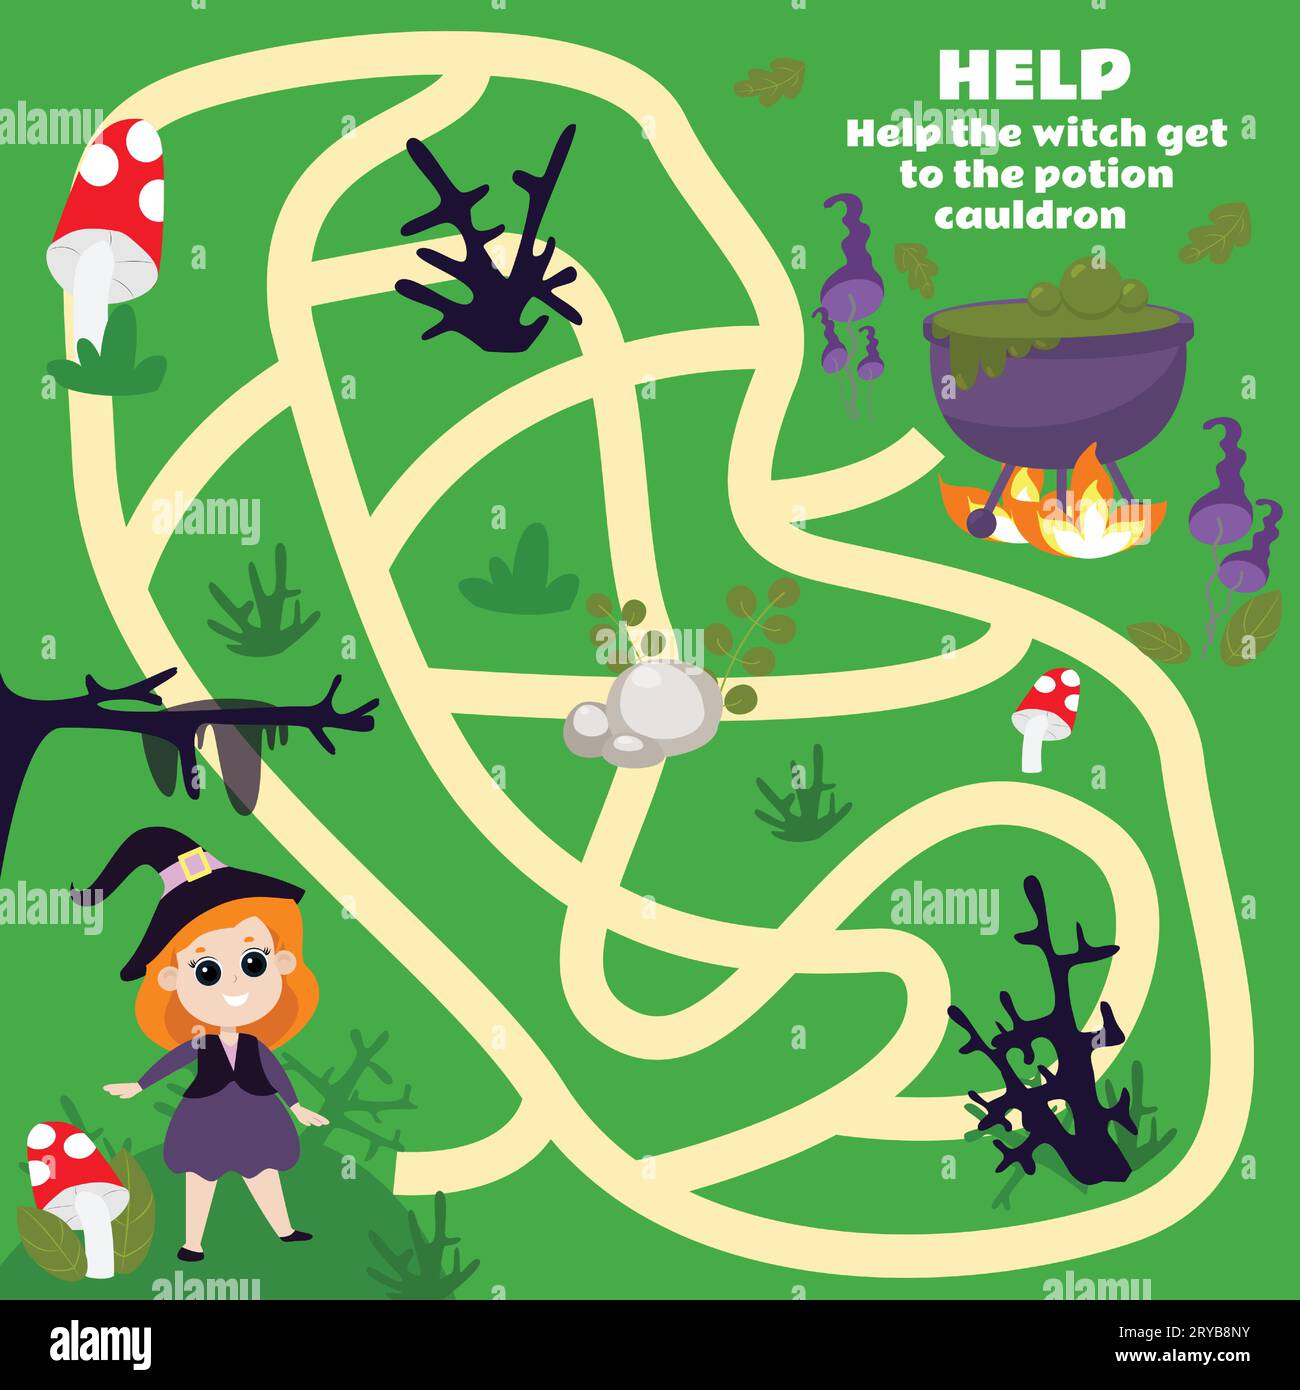 Labyrinth game for children Help the witch get to the potion cauldron. A Halloween game with a cute character. Working sheet. Stock Vector